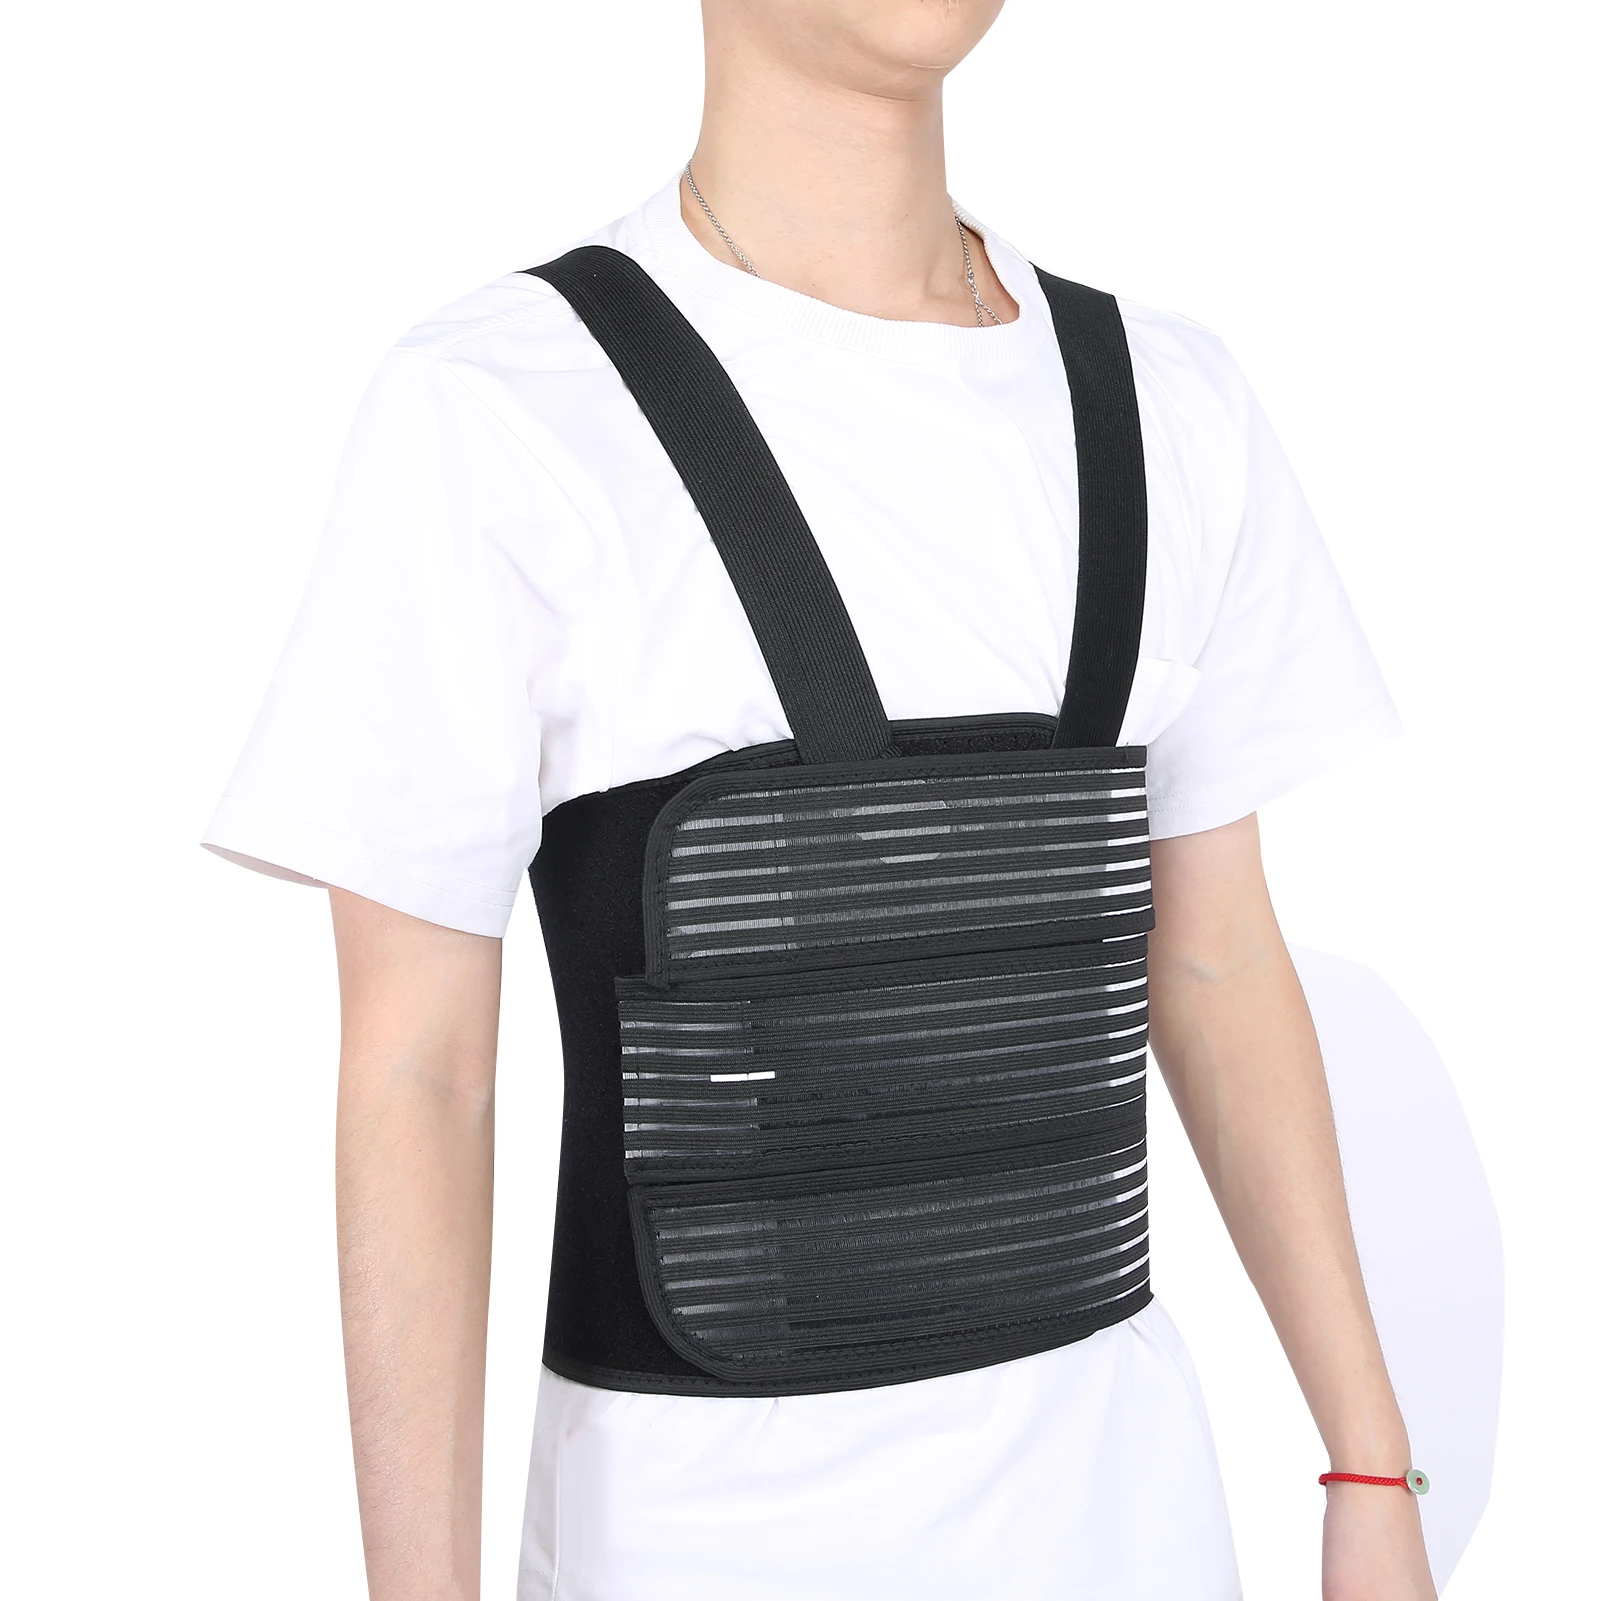 Adjustable Chest Support Belt Breathable Lumbar Protector Brace